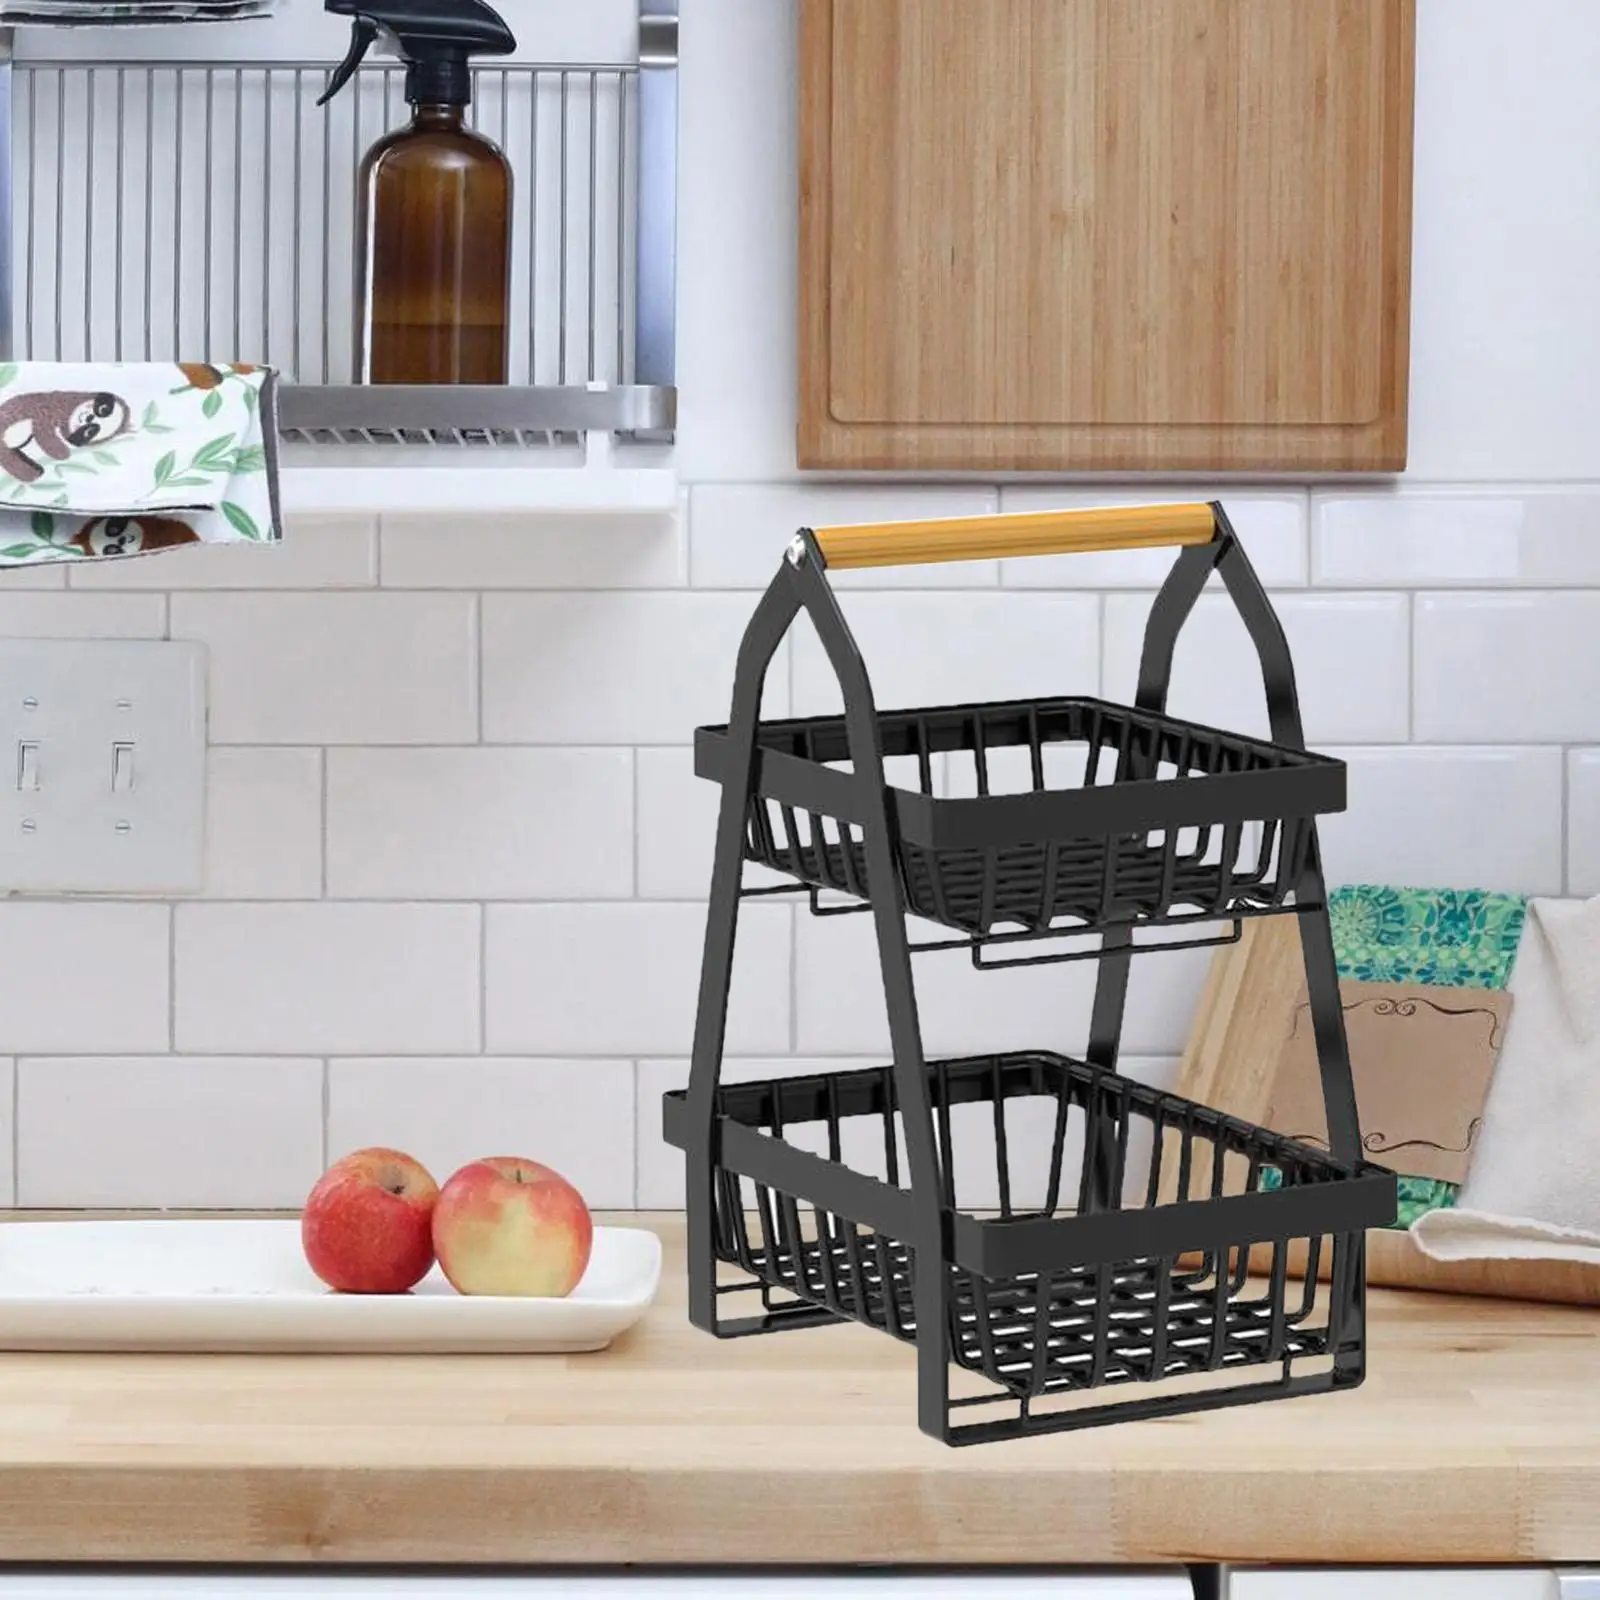 Bread Vegetable Farmhouse Fruit Basket Bowl Stand with Wooden Handle Detachable Metal Wire Basket for Countertop Dining Room